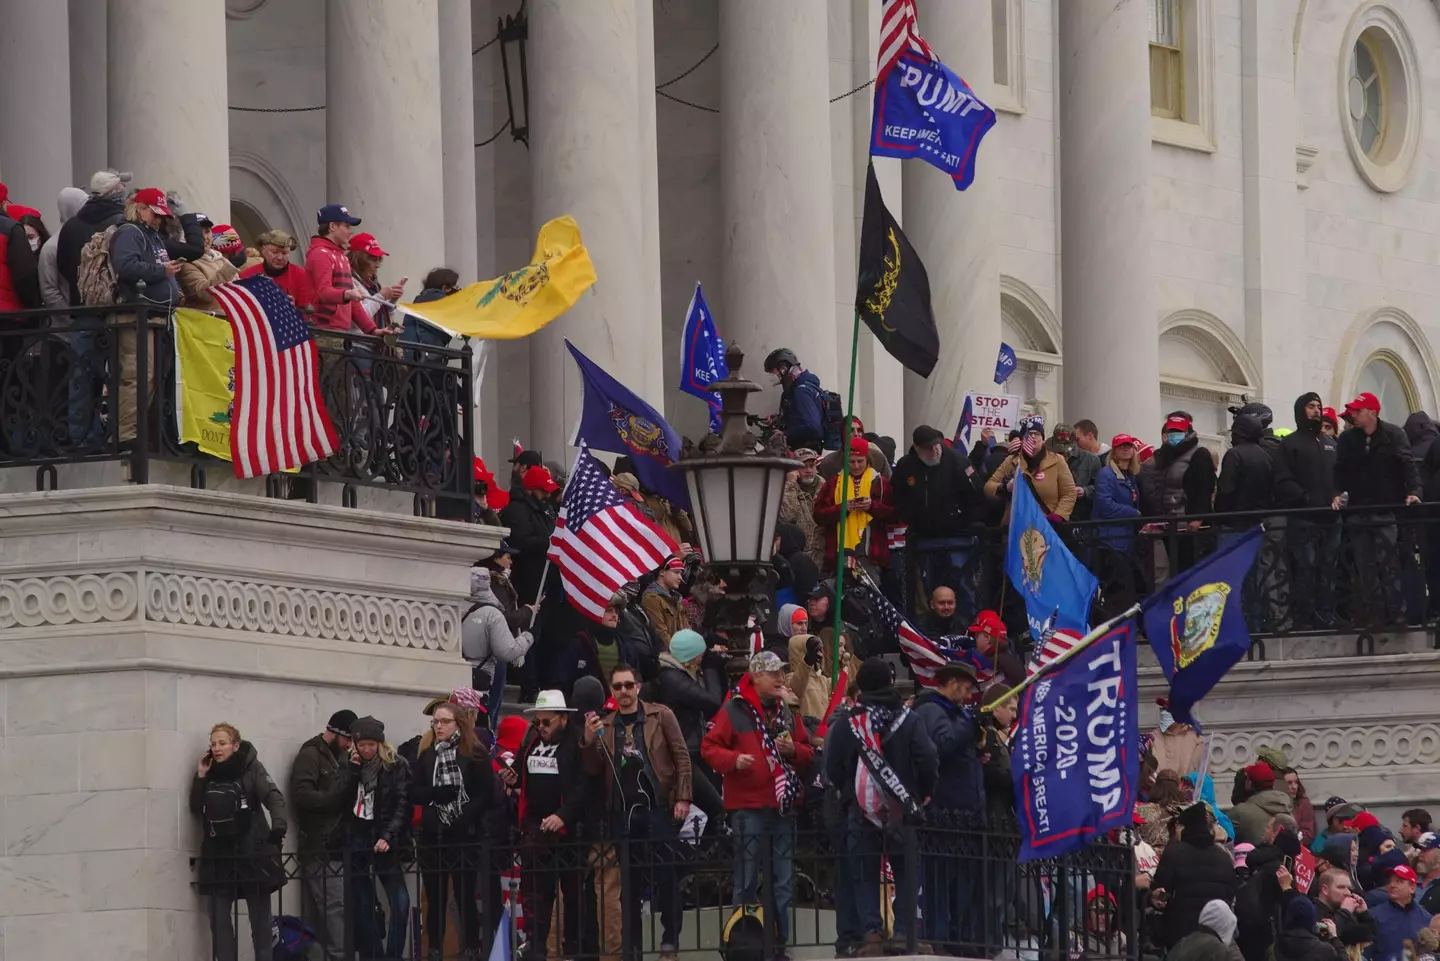 Trump supporters occupy the east front of the US Capitol during the riots.